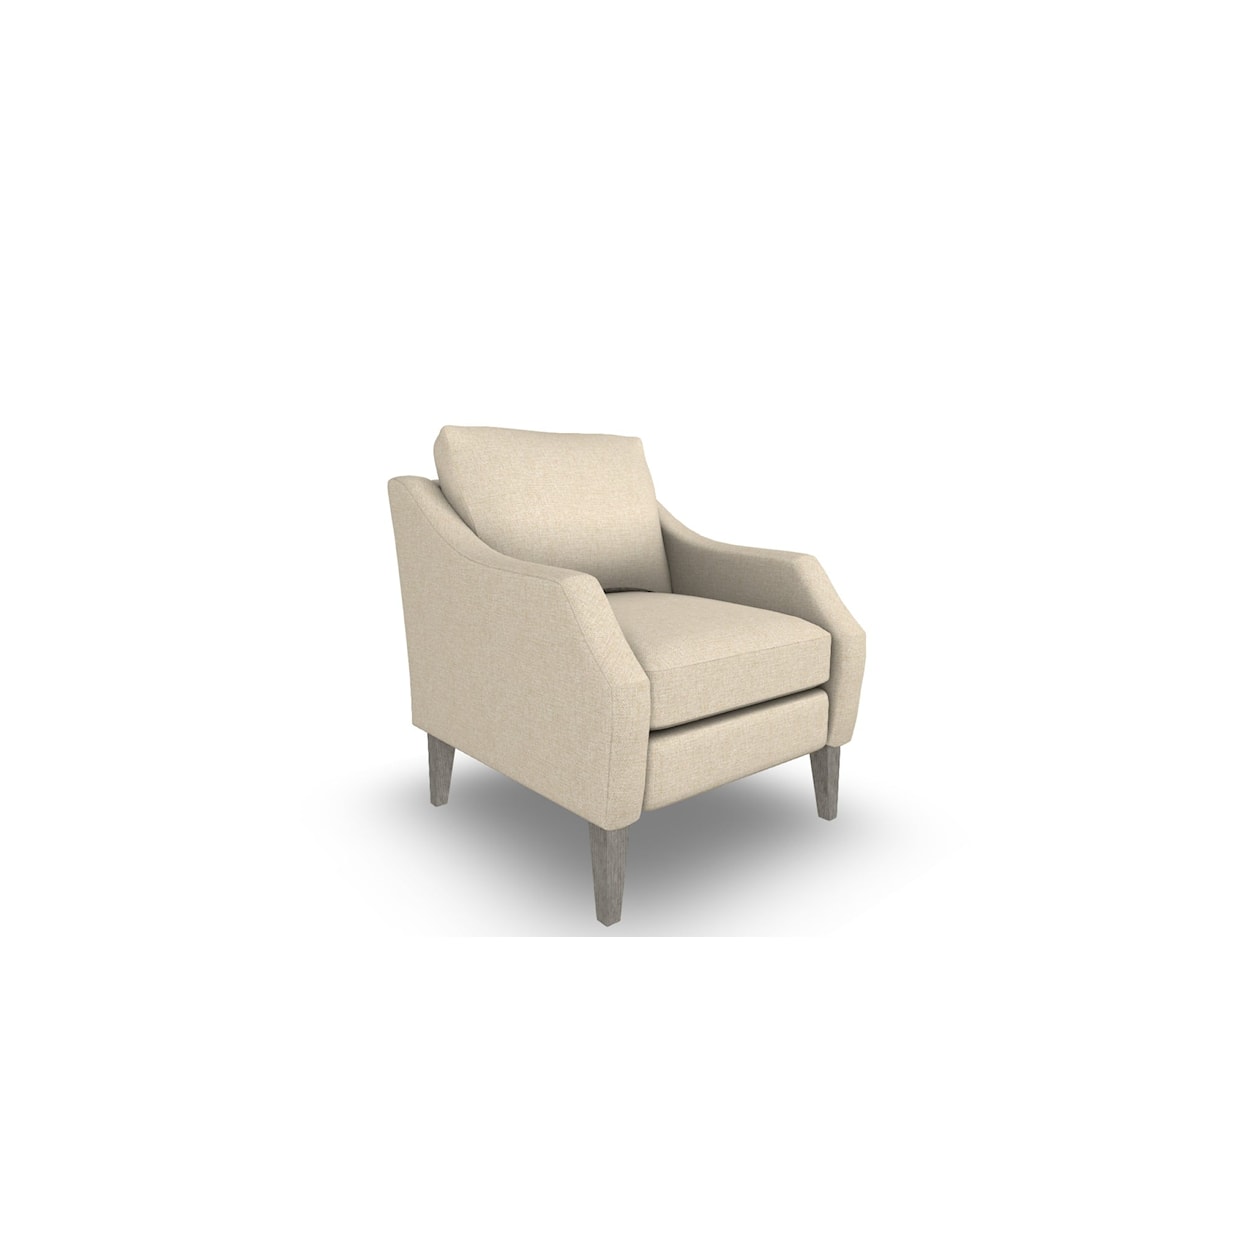 Bravo Furniture Syndicate Stationary Chair